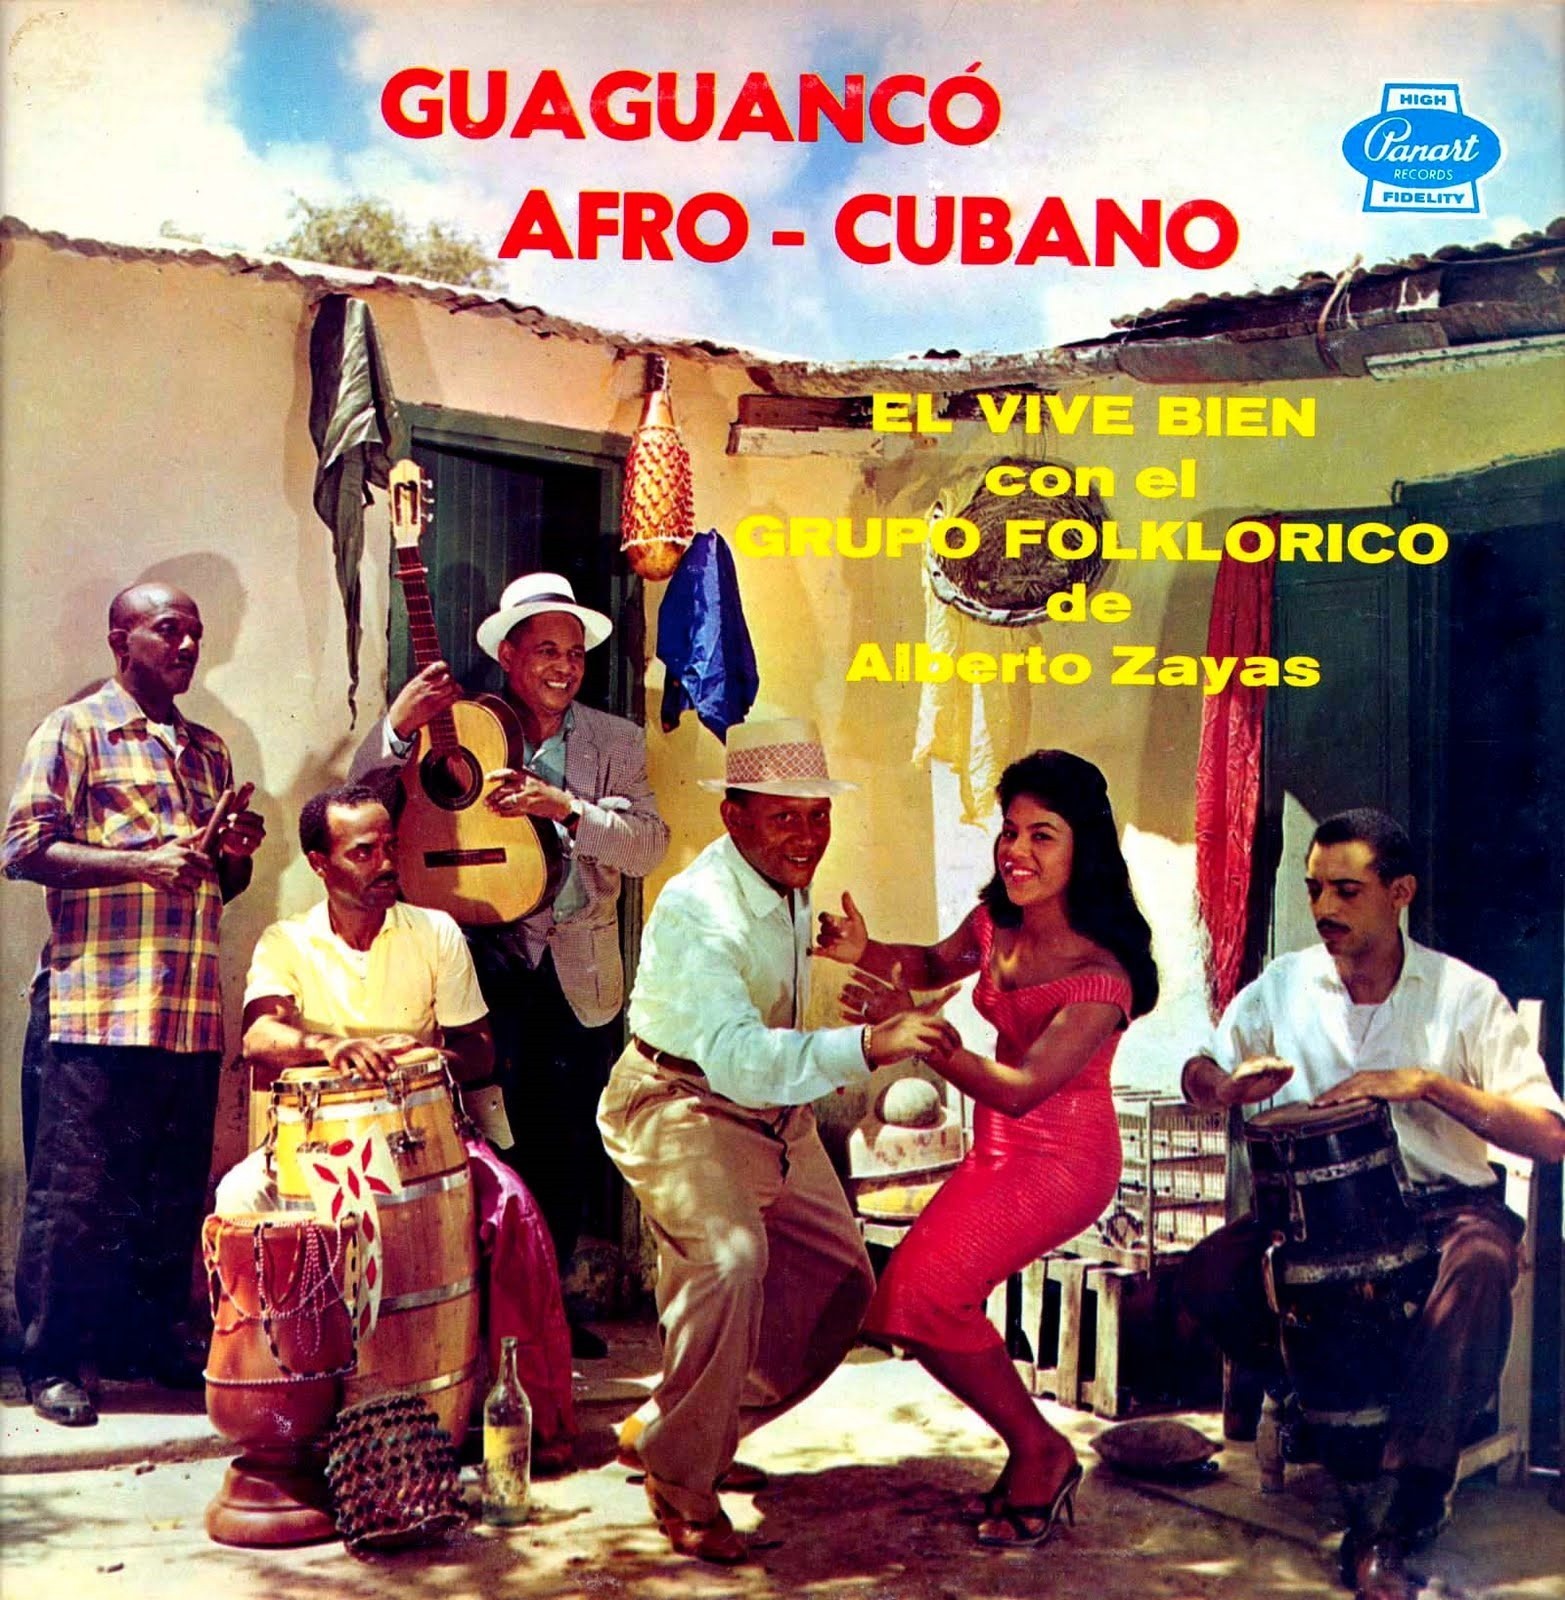 Panart 'GuaguancÃ³ Afro-Cubano' LP is in the video above. 